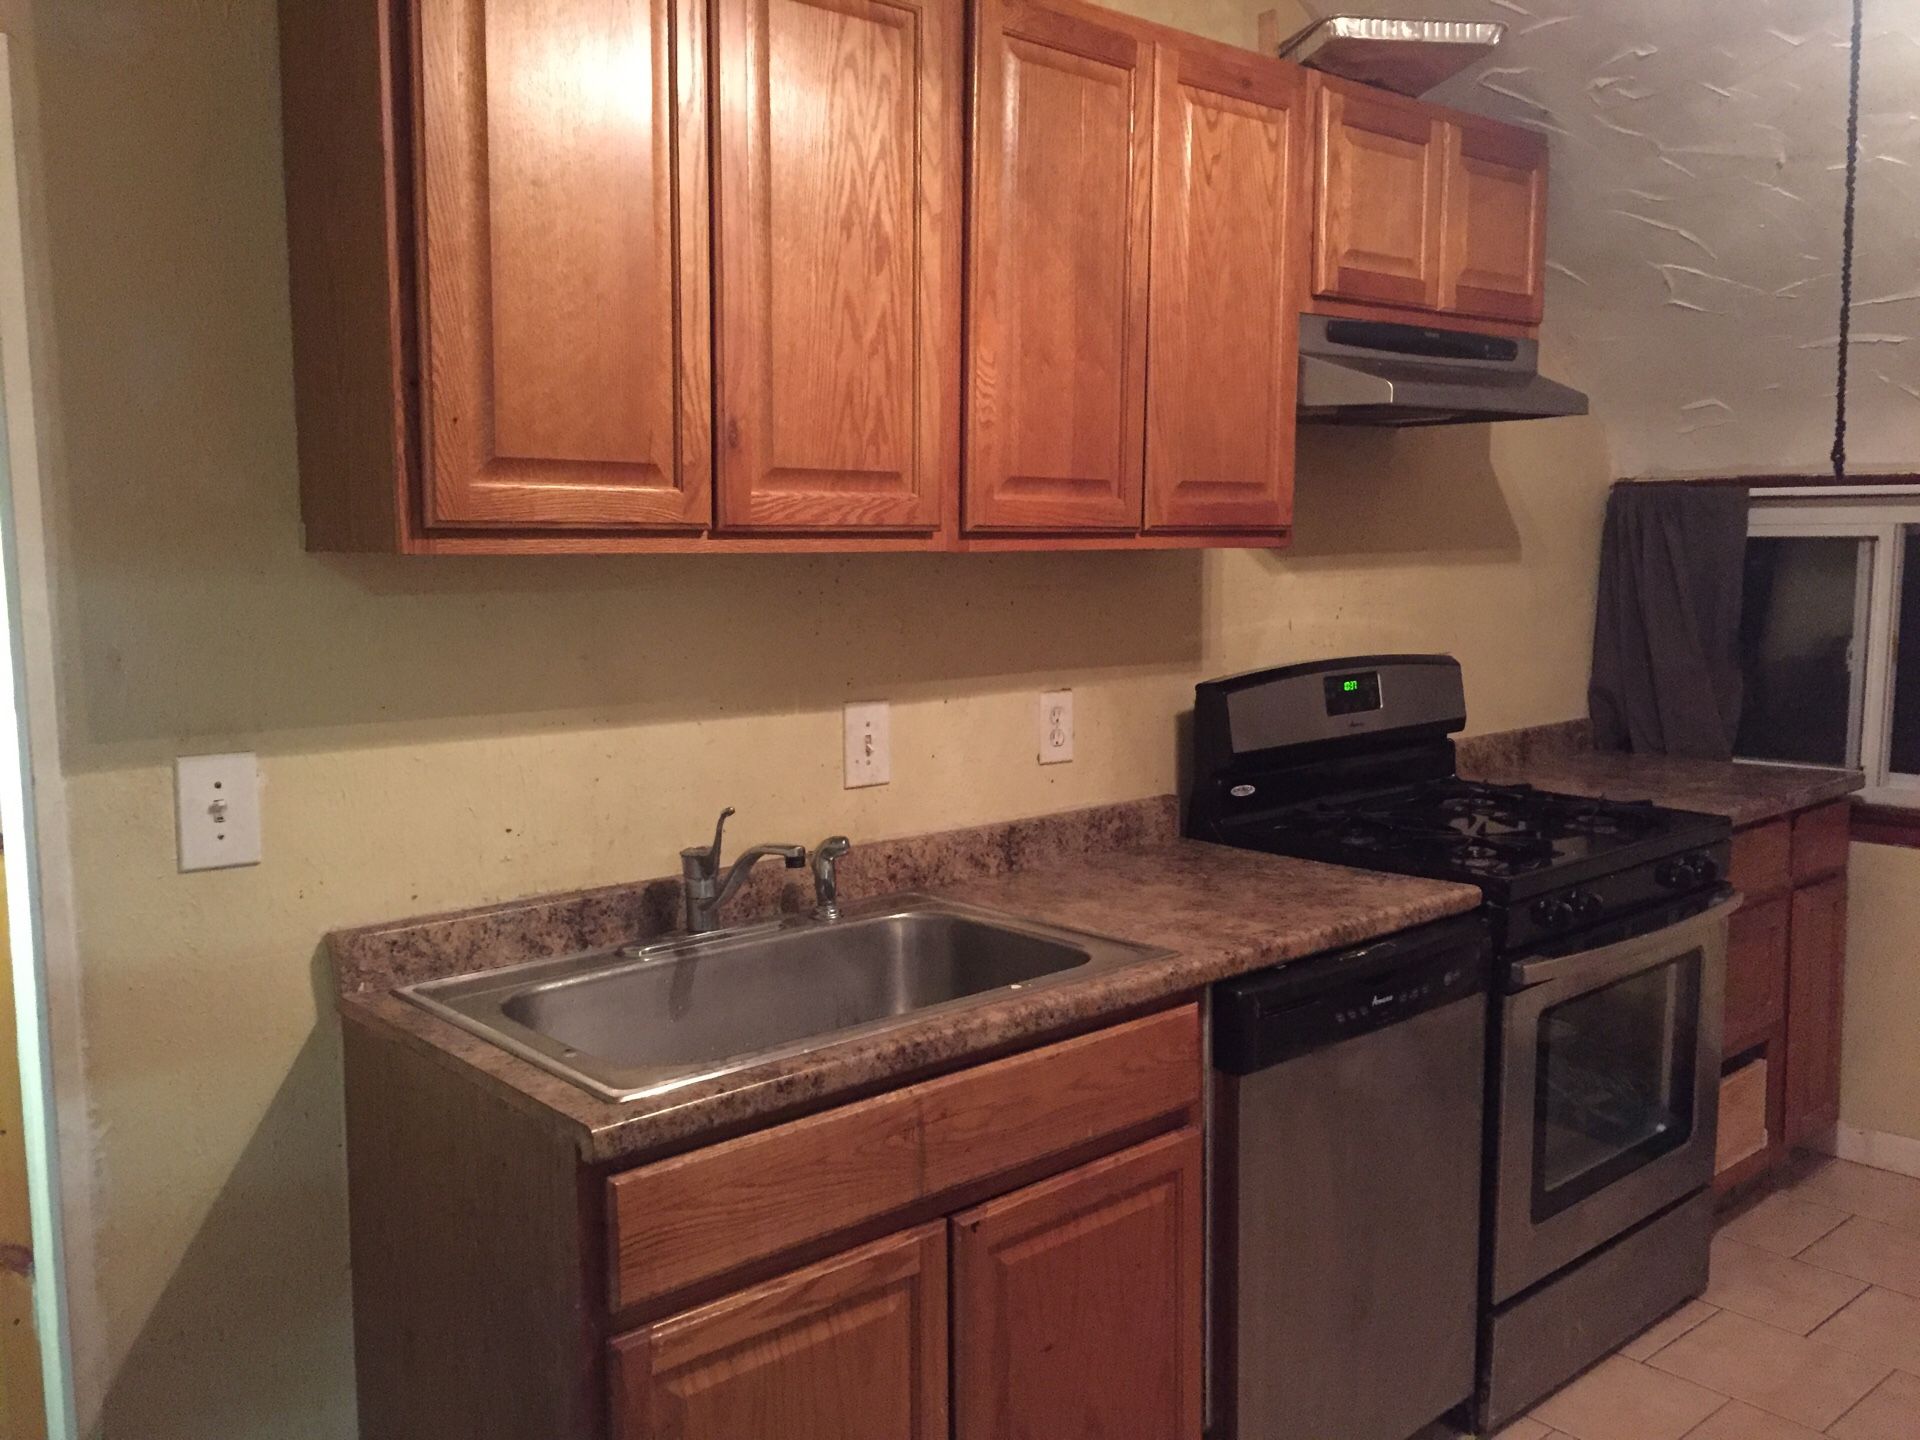 Full Kitchen with Wooden Cabinets, Double Pantry, Sink, Counter, and Vent